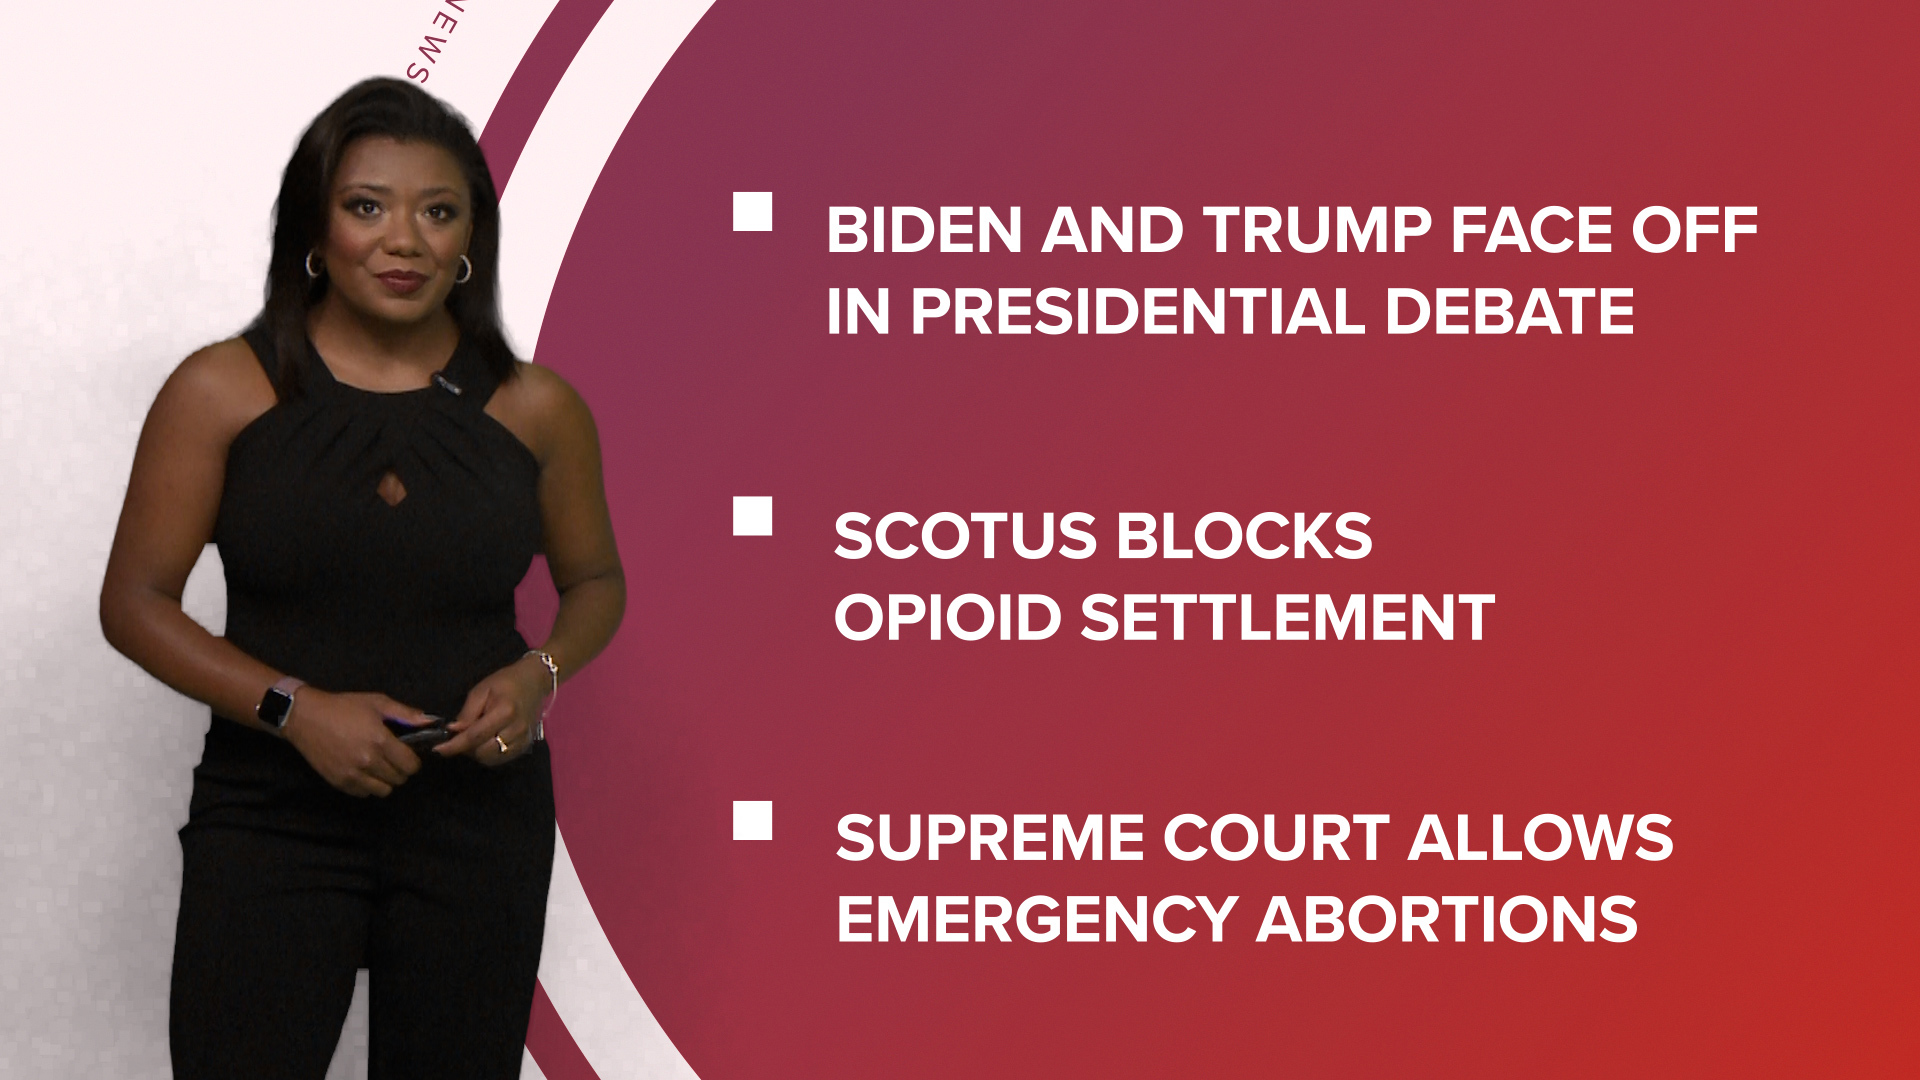 A look at what is happening in the news from fact-checking claims in the first presidential debate to Supreme Court blocks Purdue Pharma settlement and more.